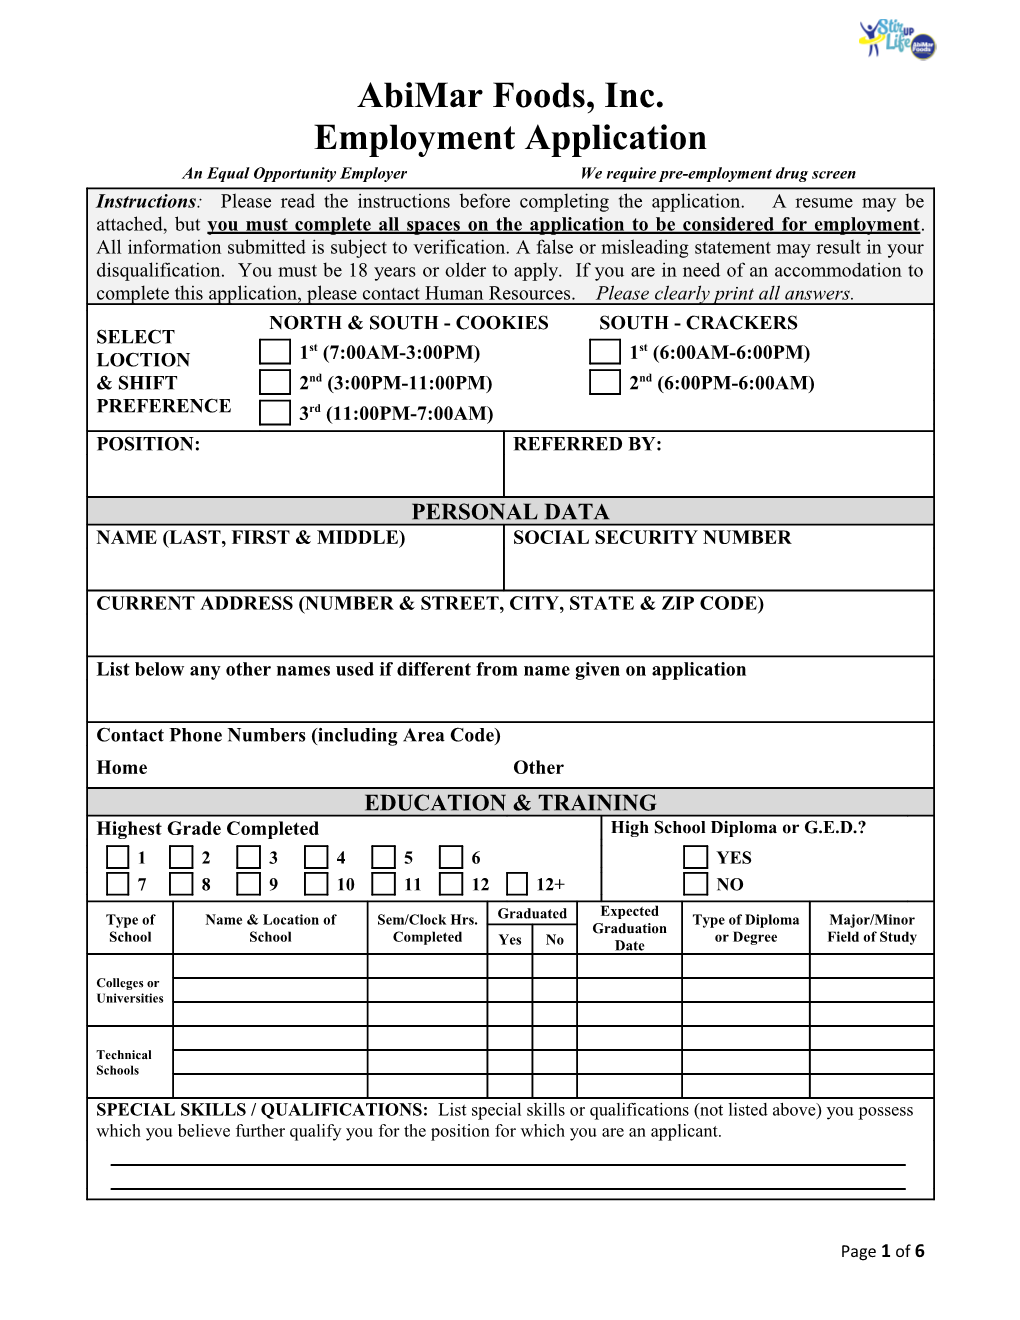 Abimar Foods, Inc. Employment Application an Equal Opportunity Employer / We Require